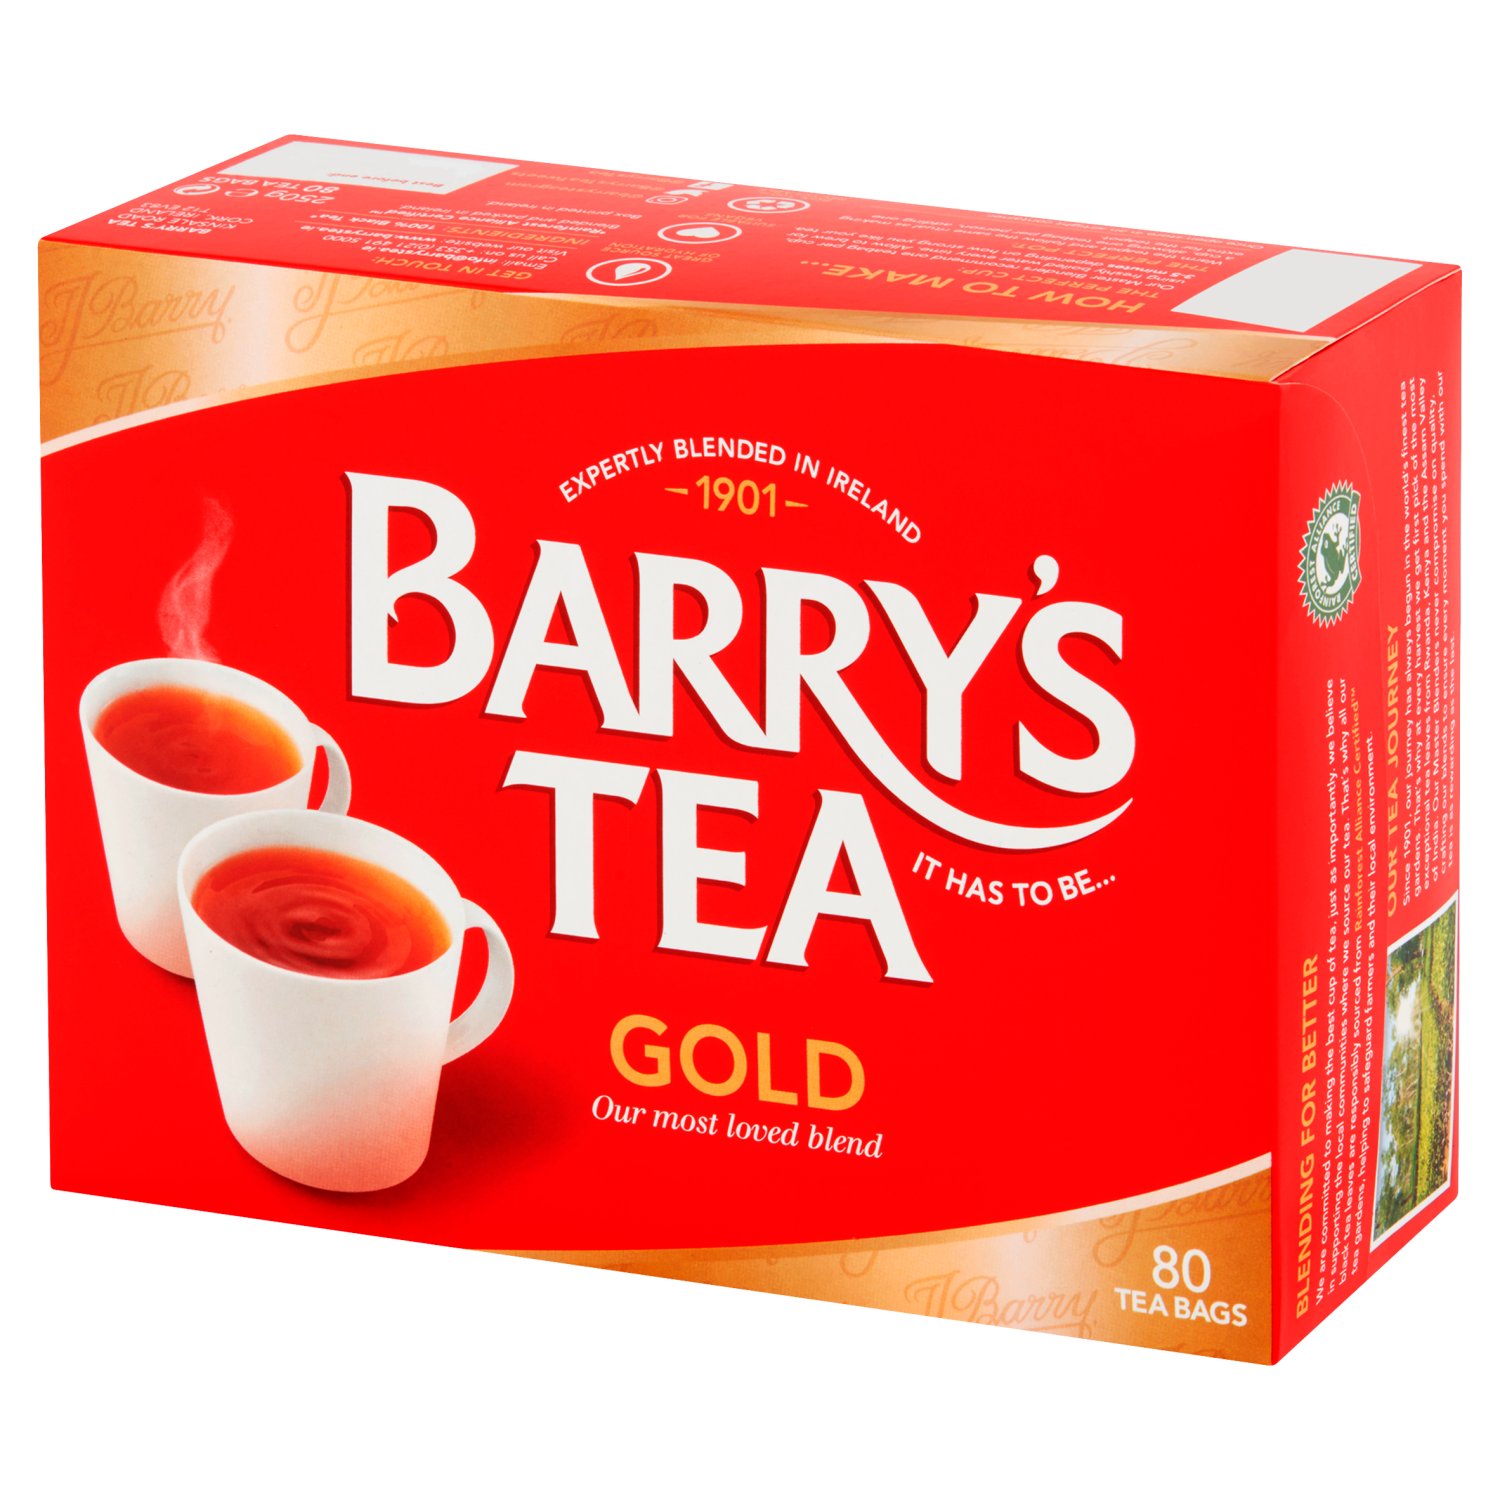 It has to be... Barry's Gold
We at Barry's Tea always use our skill and expertise to blend to Irish tastes. Our Gold Blend is exceptional in its quality and bright golden colour, every time.

100% Natural Black Tea
From Rainforest Alliance Certified™ tea gardens
Selected and Sourced
Across Rwanda, Kenya and the Assam Valley of India
Expertly Blended in Ireland
By our Master Blenders who never compromise on quality
Making Tea Moments
It has to be... Barry's Tea